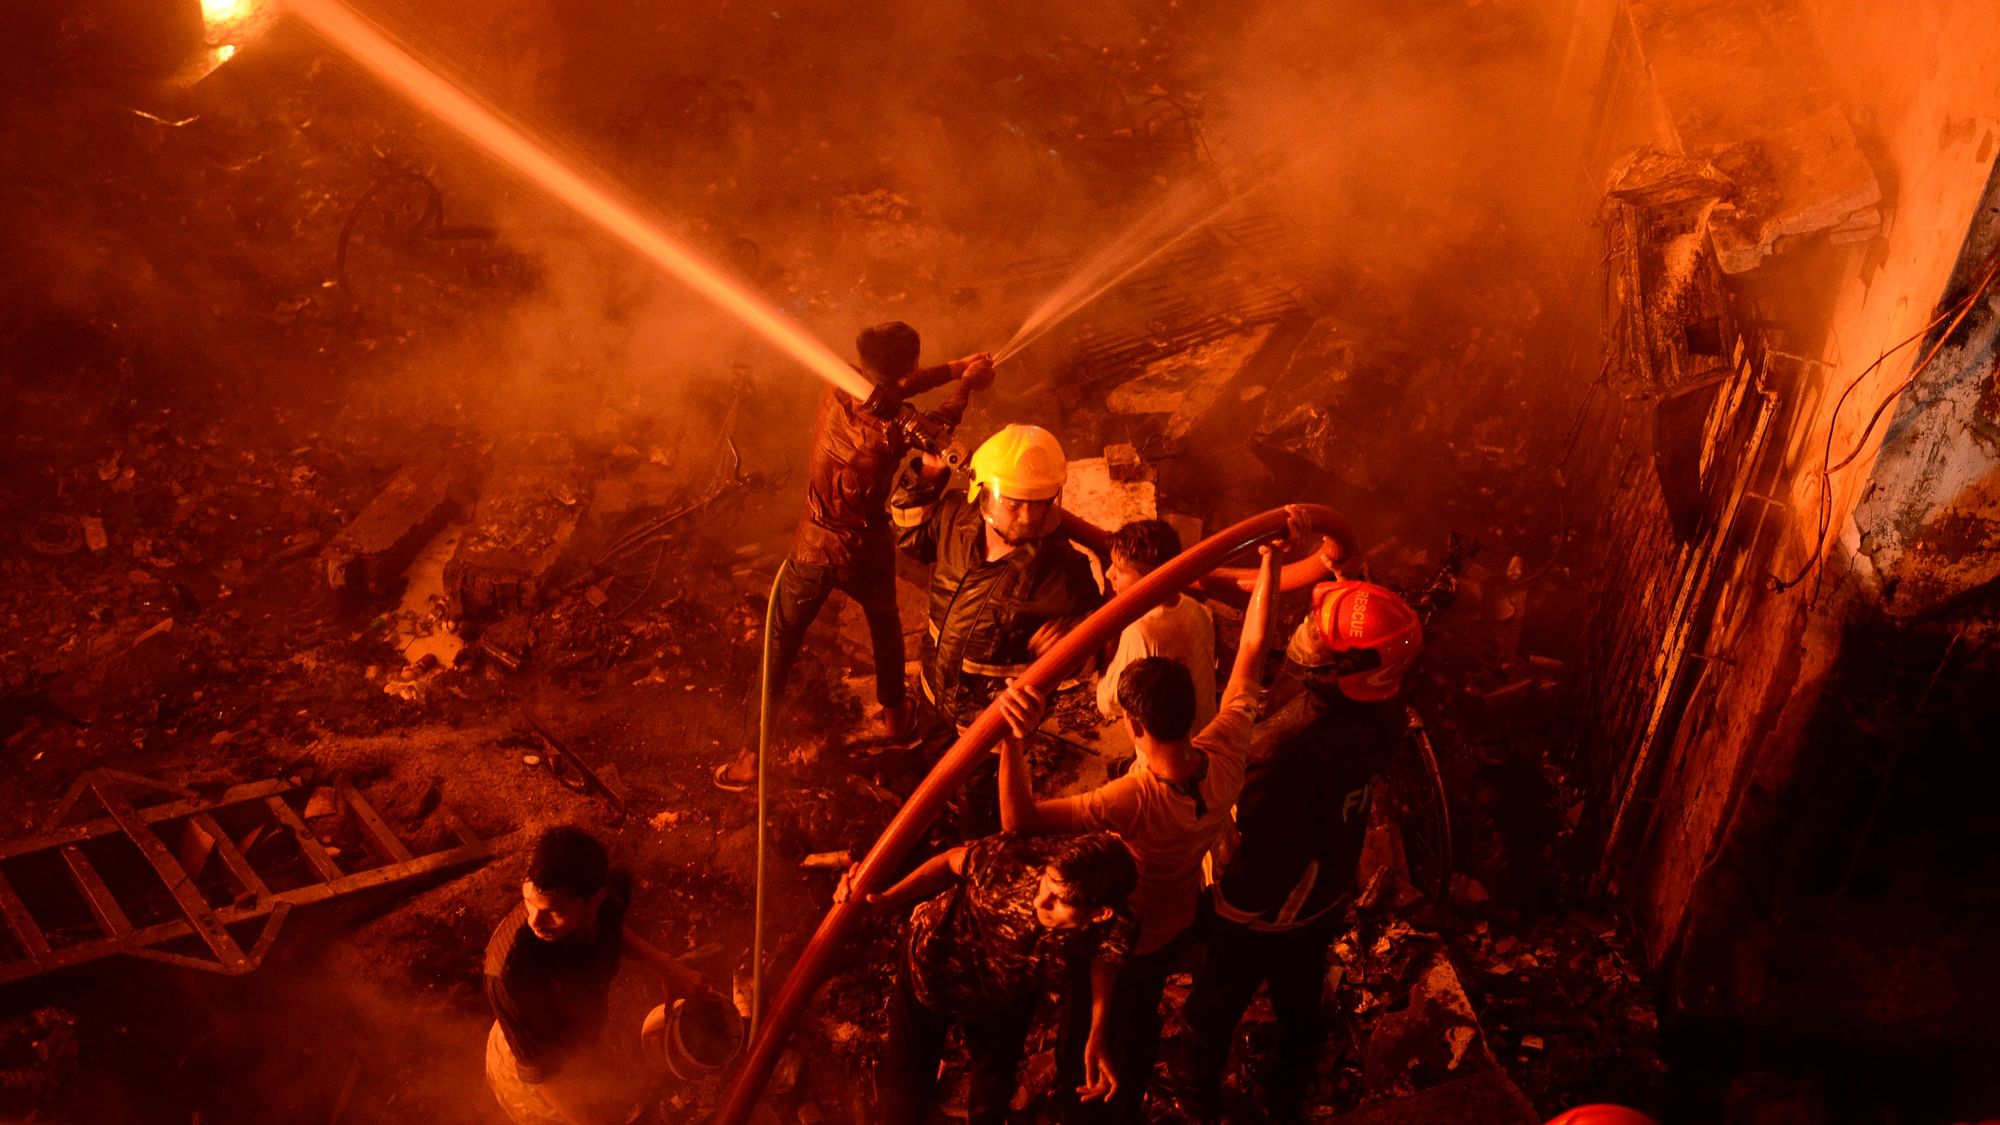 The blaze at Chawkbazar in the old part of Dhaka, that killed at least 67, might have originated from a gas cylinder.